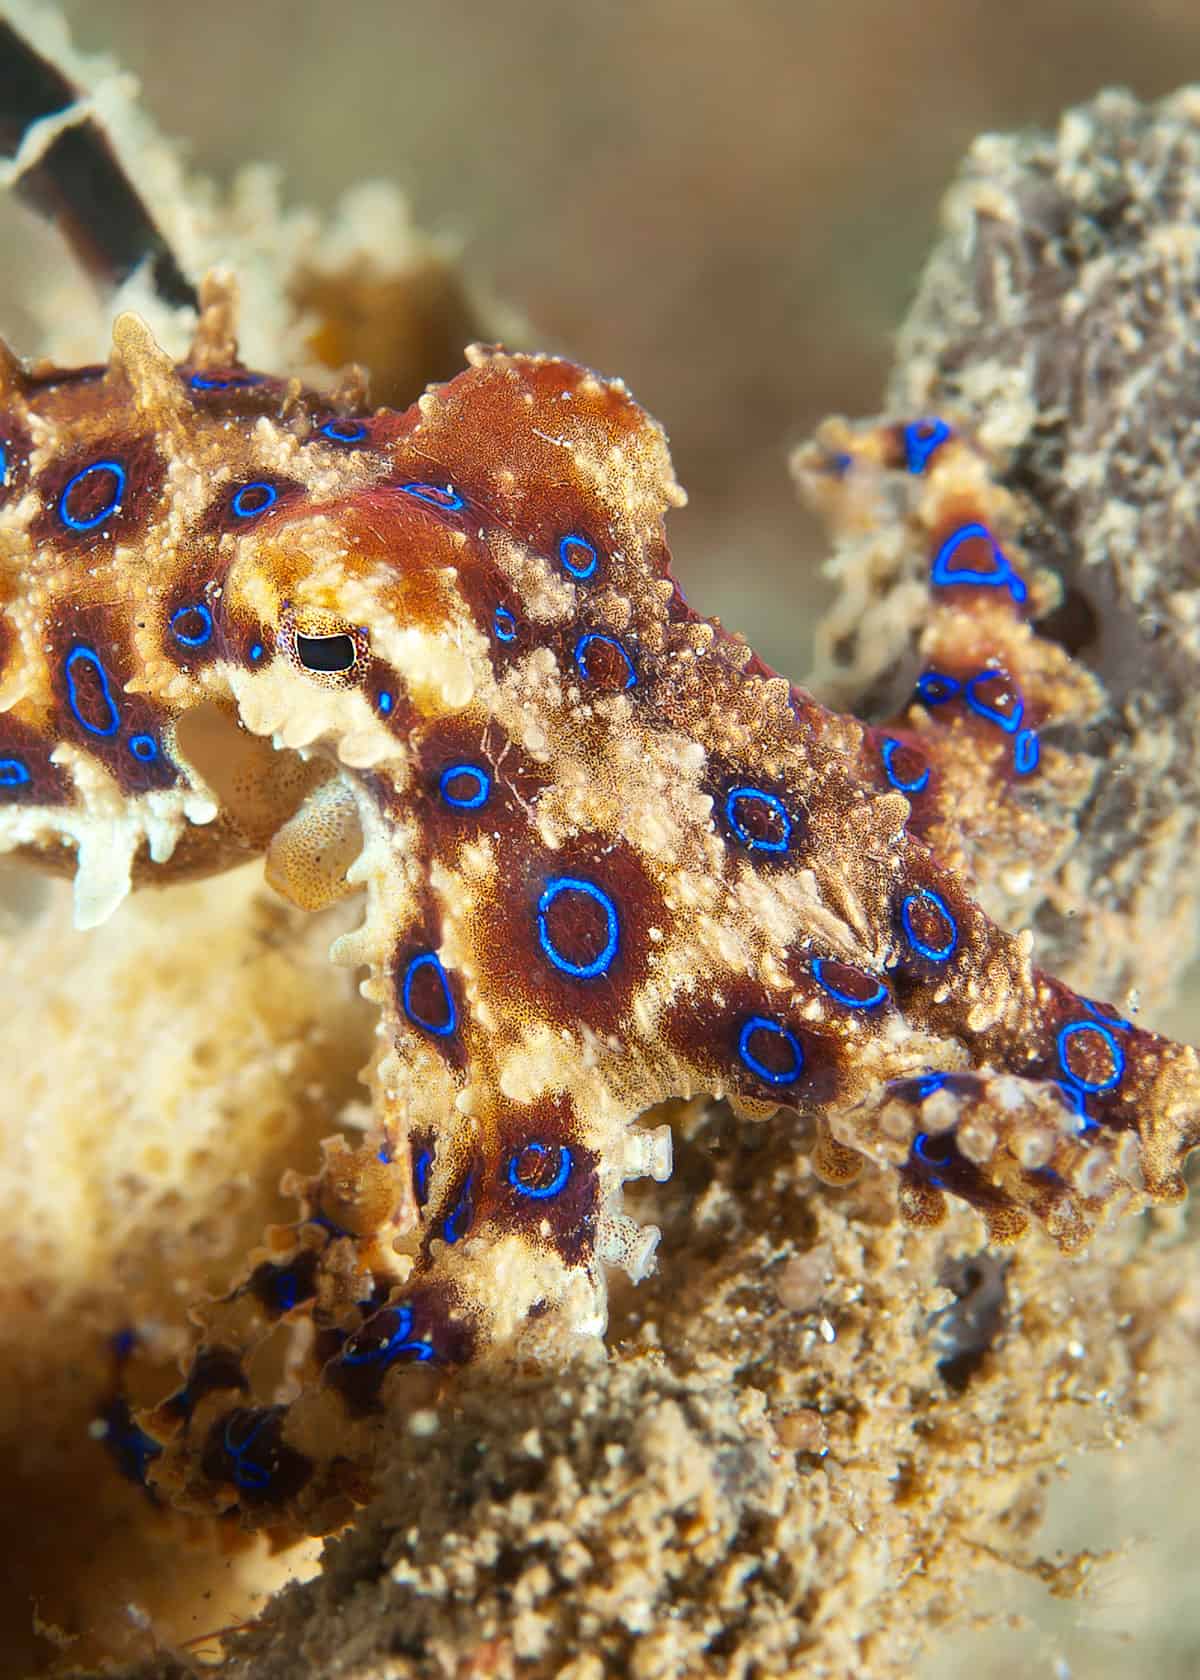 Colorful Blue Ringed Octopus